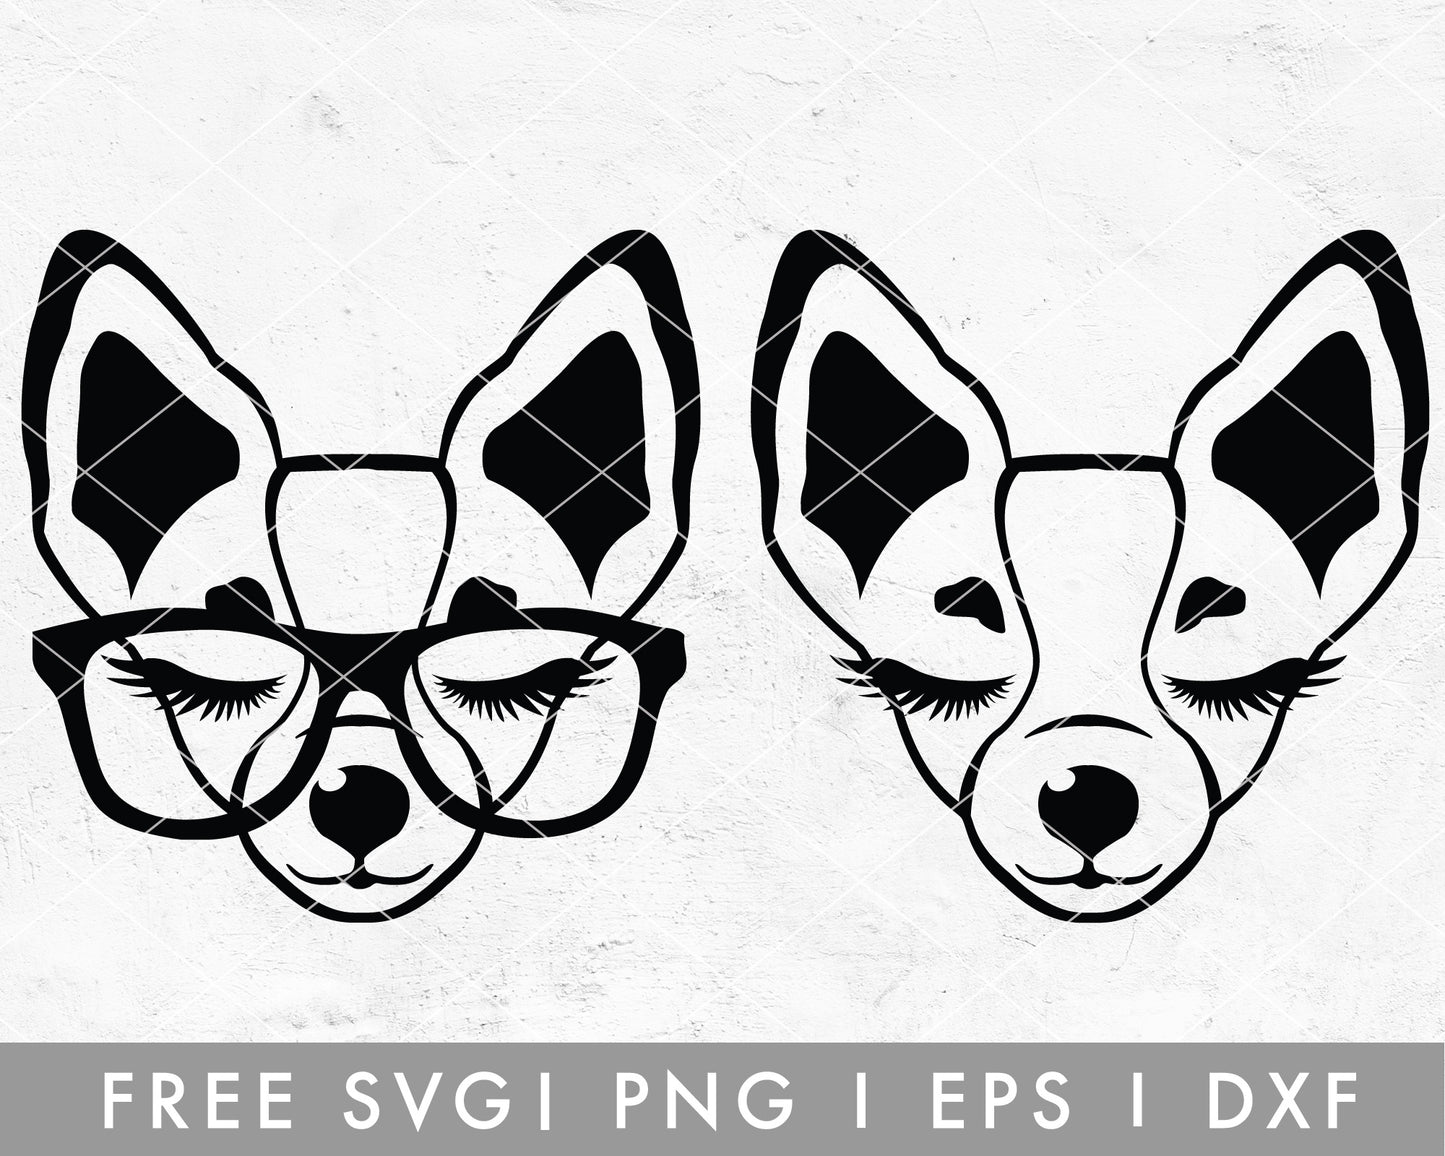 FREE FREE Animal Face SVG | Chihuahua SVG Cut File for Cricut, Cameo Silhouette | Free SVG Cut File